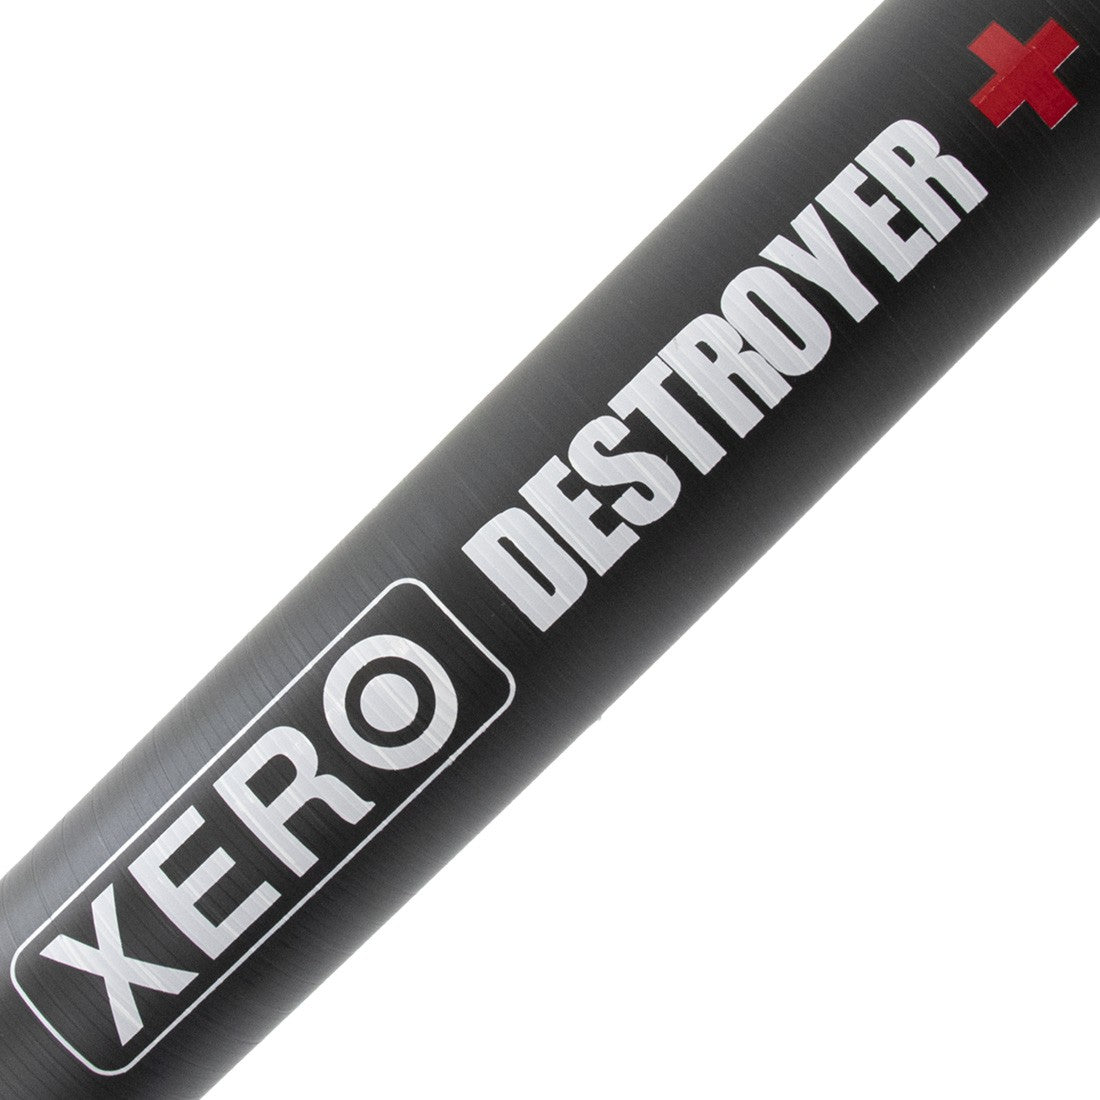 XERO Destroyer+ Universal Extension - Detailed Decal Close-Up View